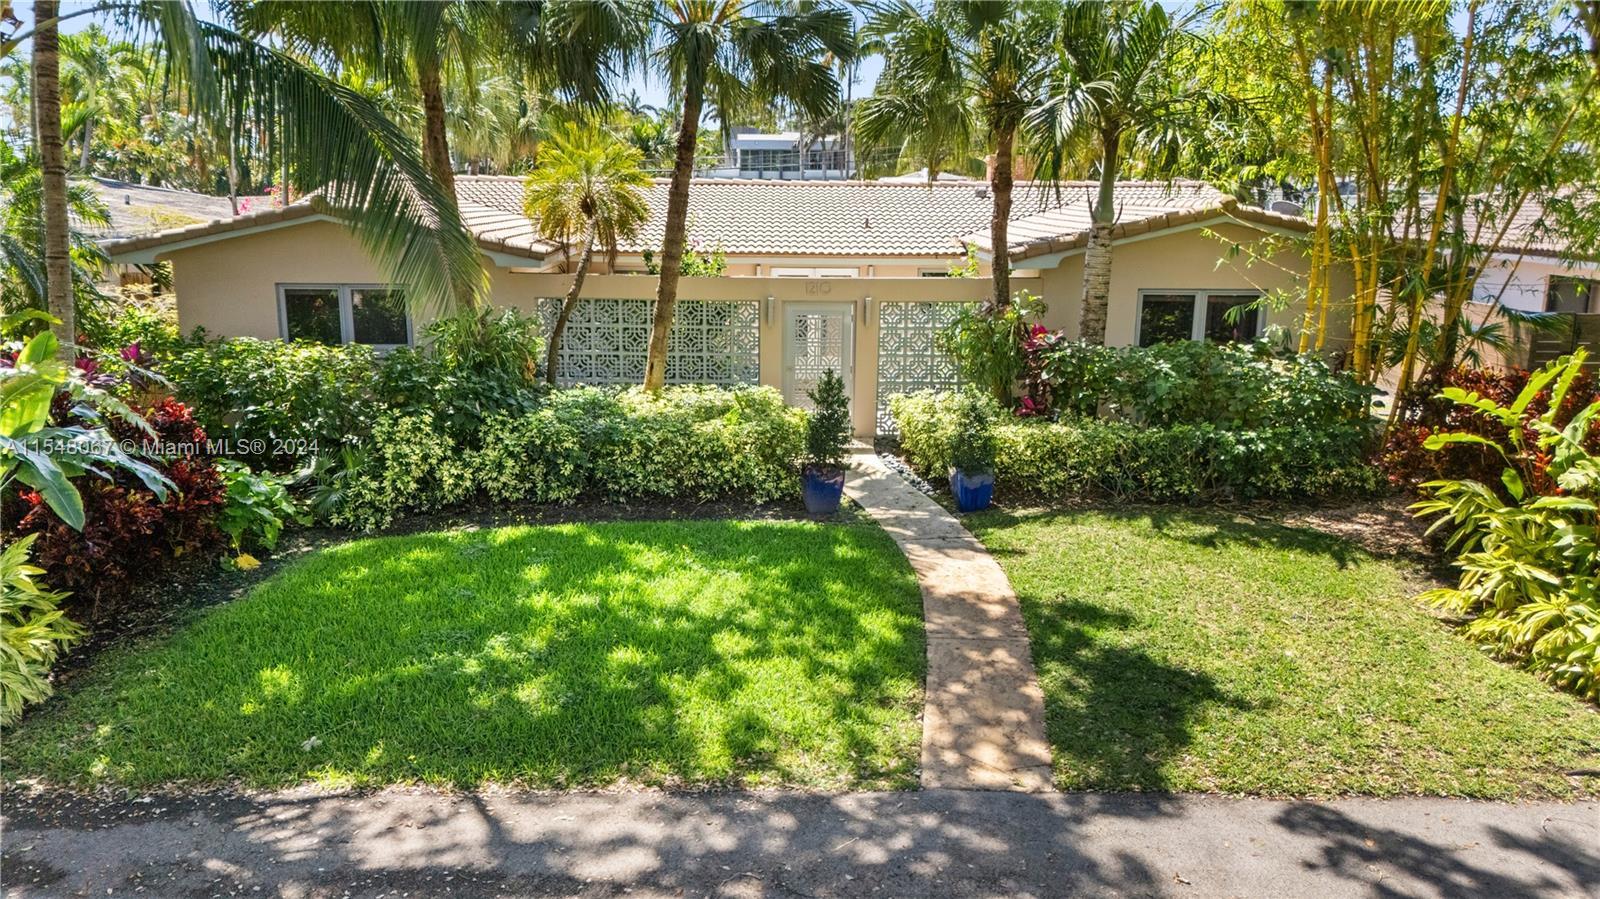 Welcome To this meticulously maintained home nestled in the sought-after Miami Shores area. With a p